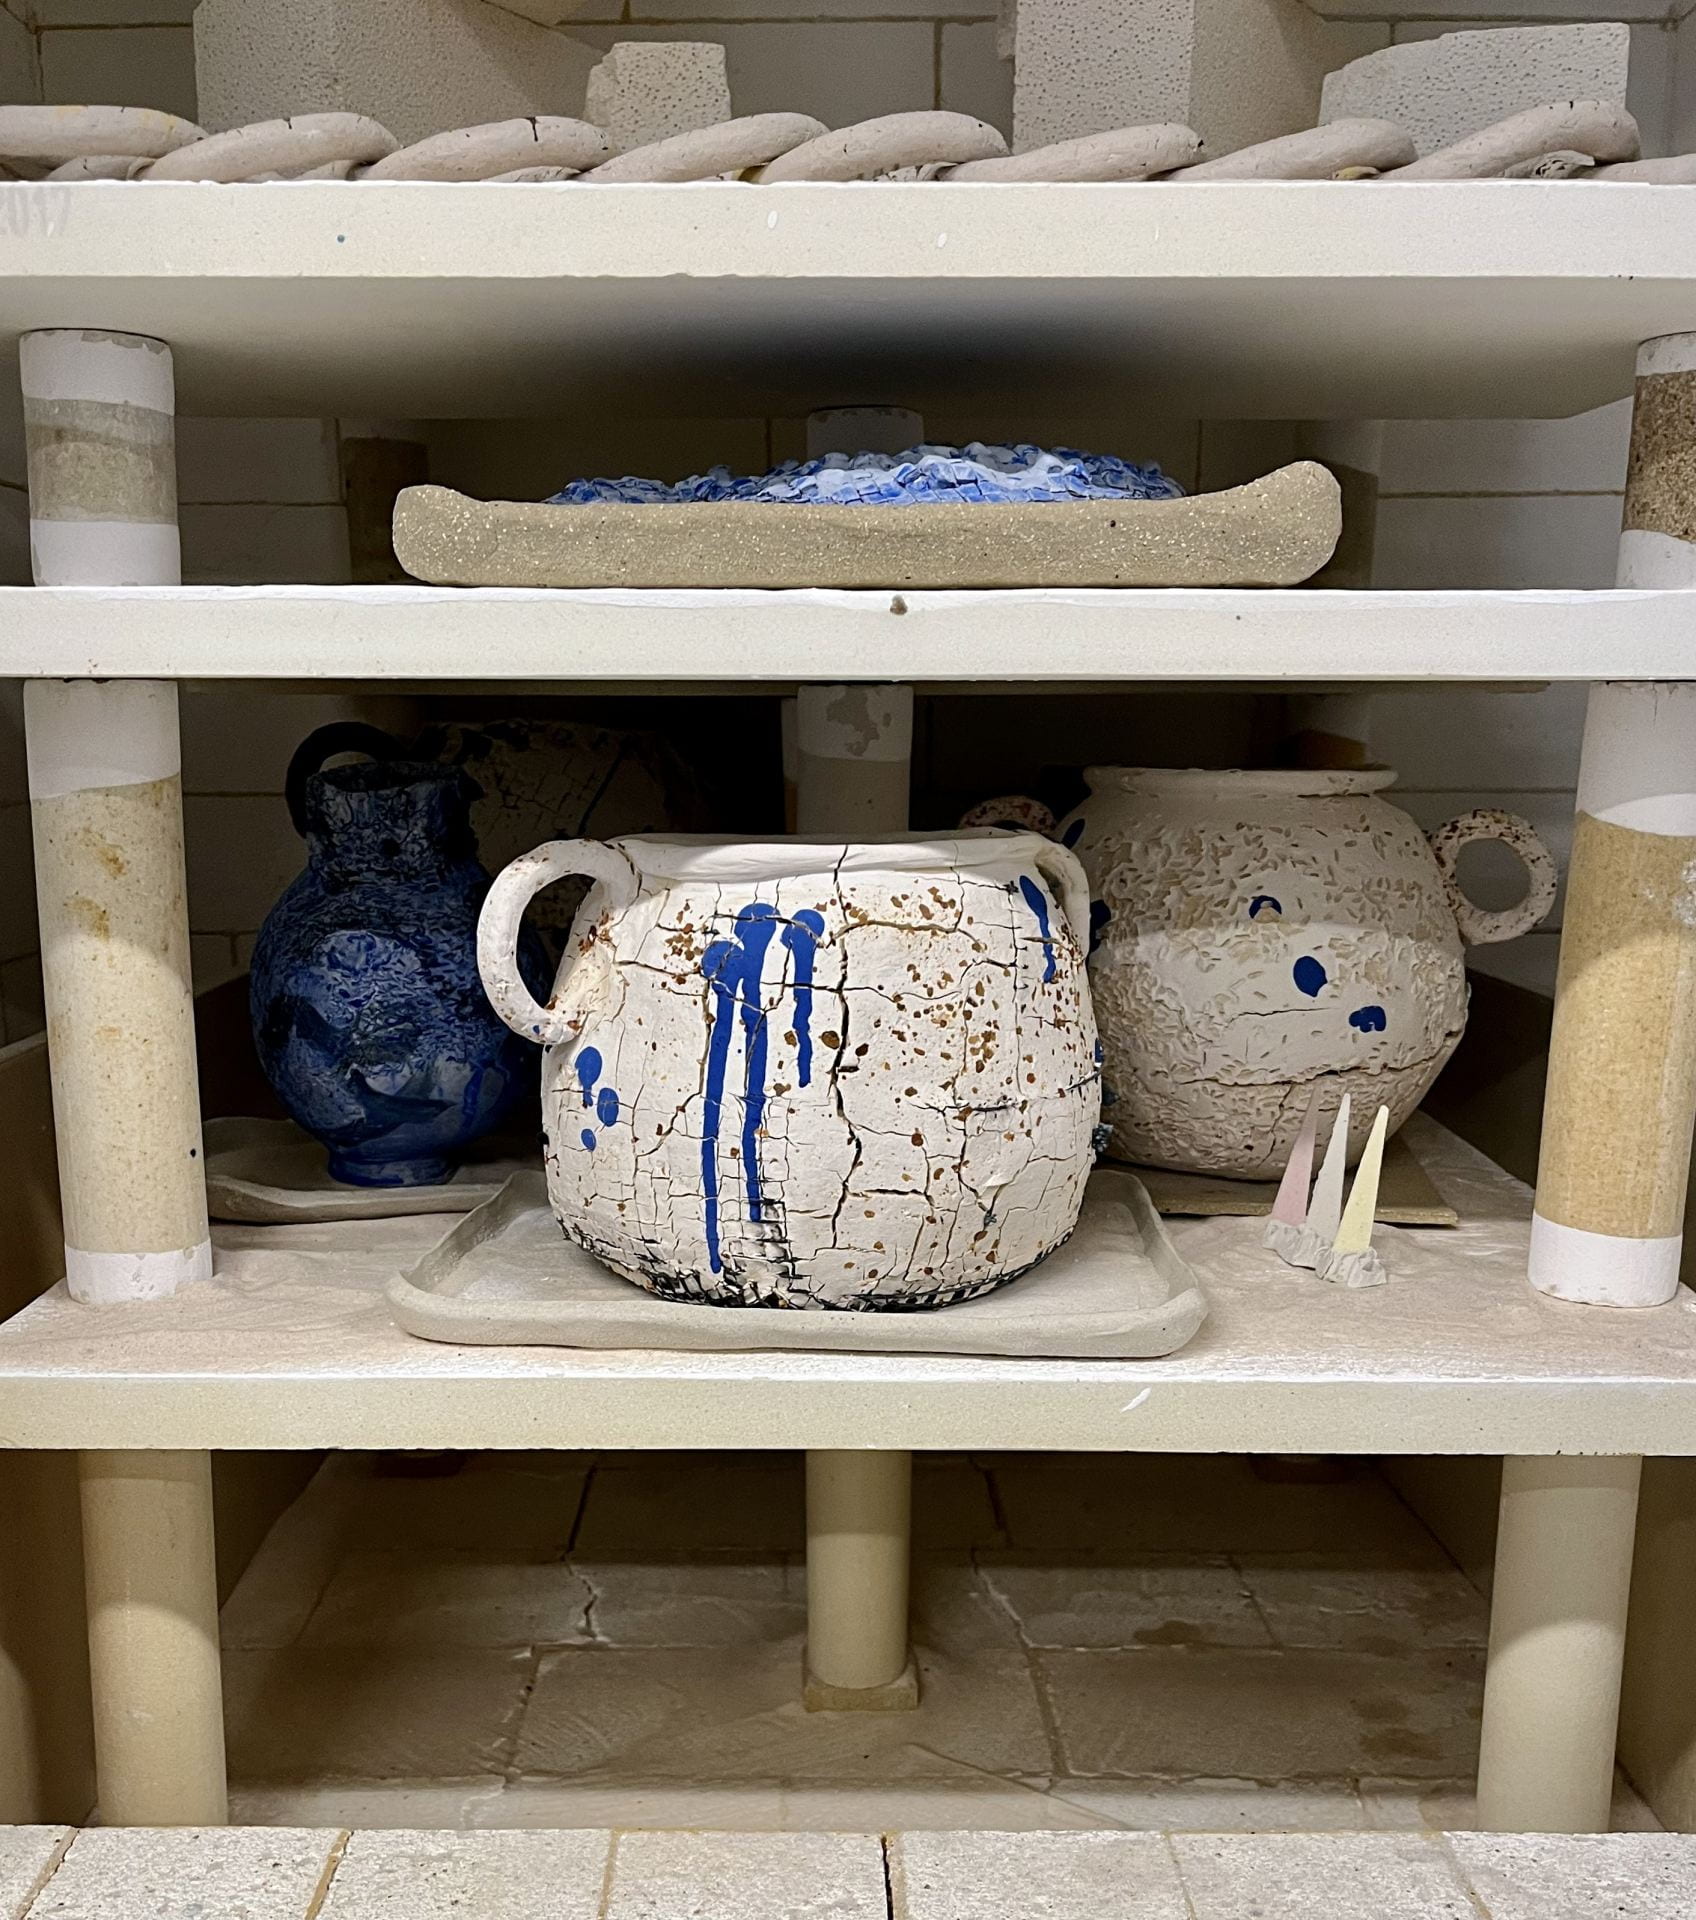 Kiln packed with moon jars, cones on the shelf, gas kiln, ready to be fired.